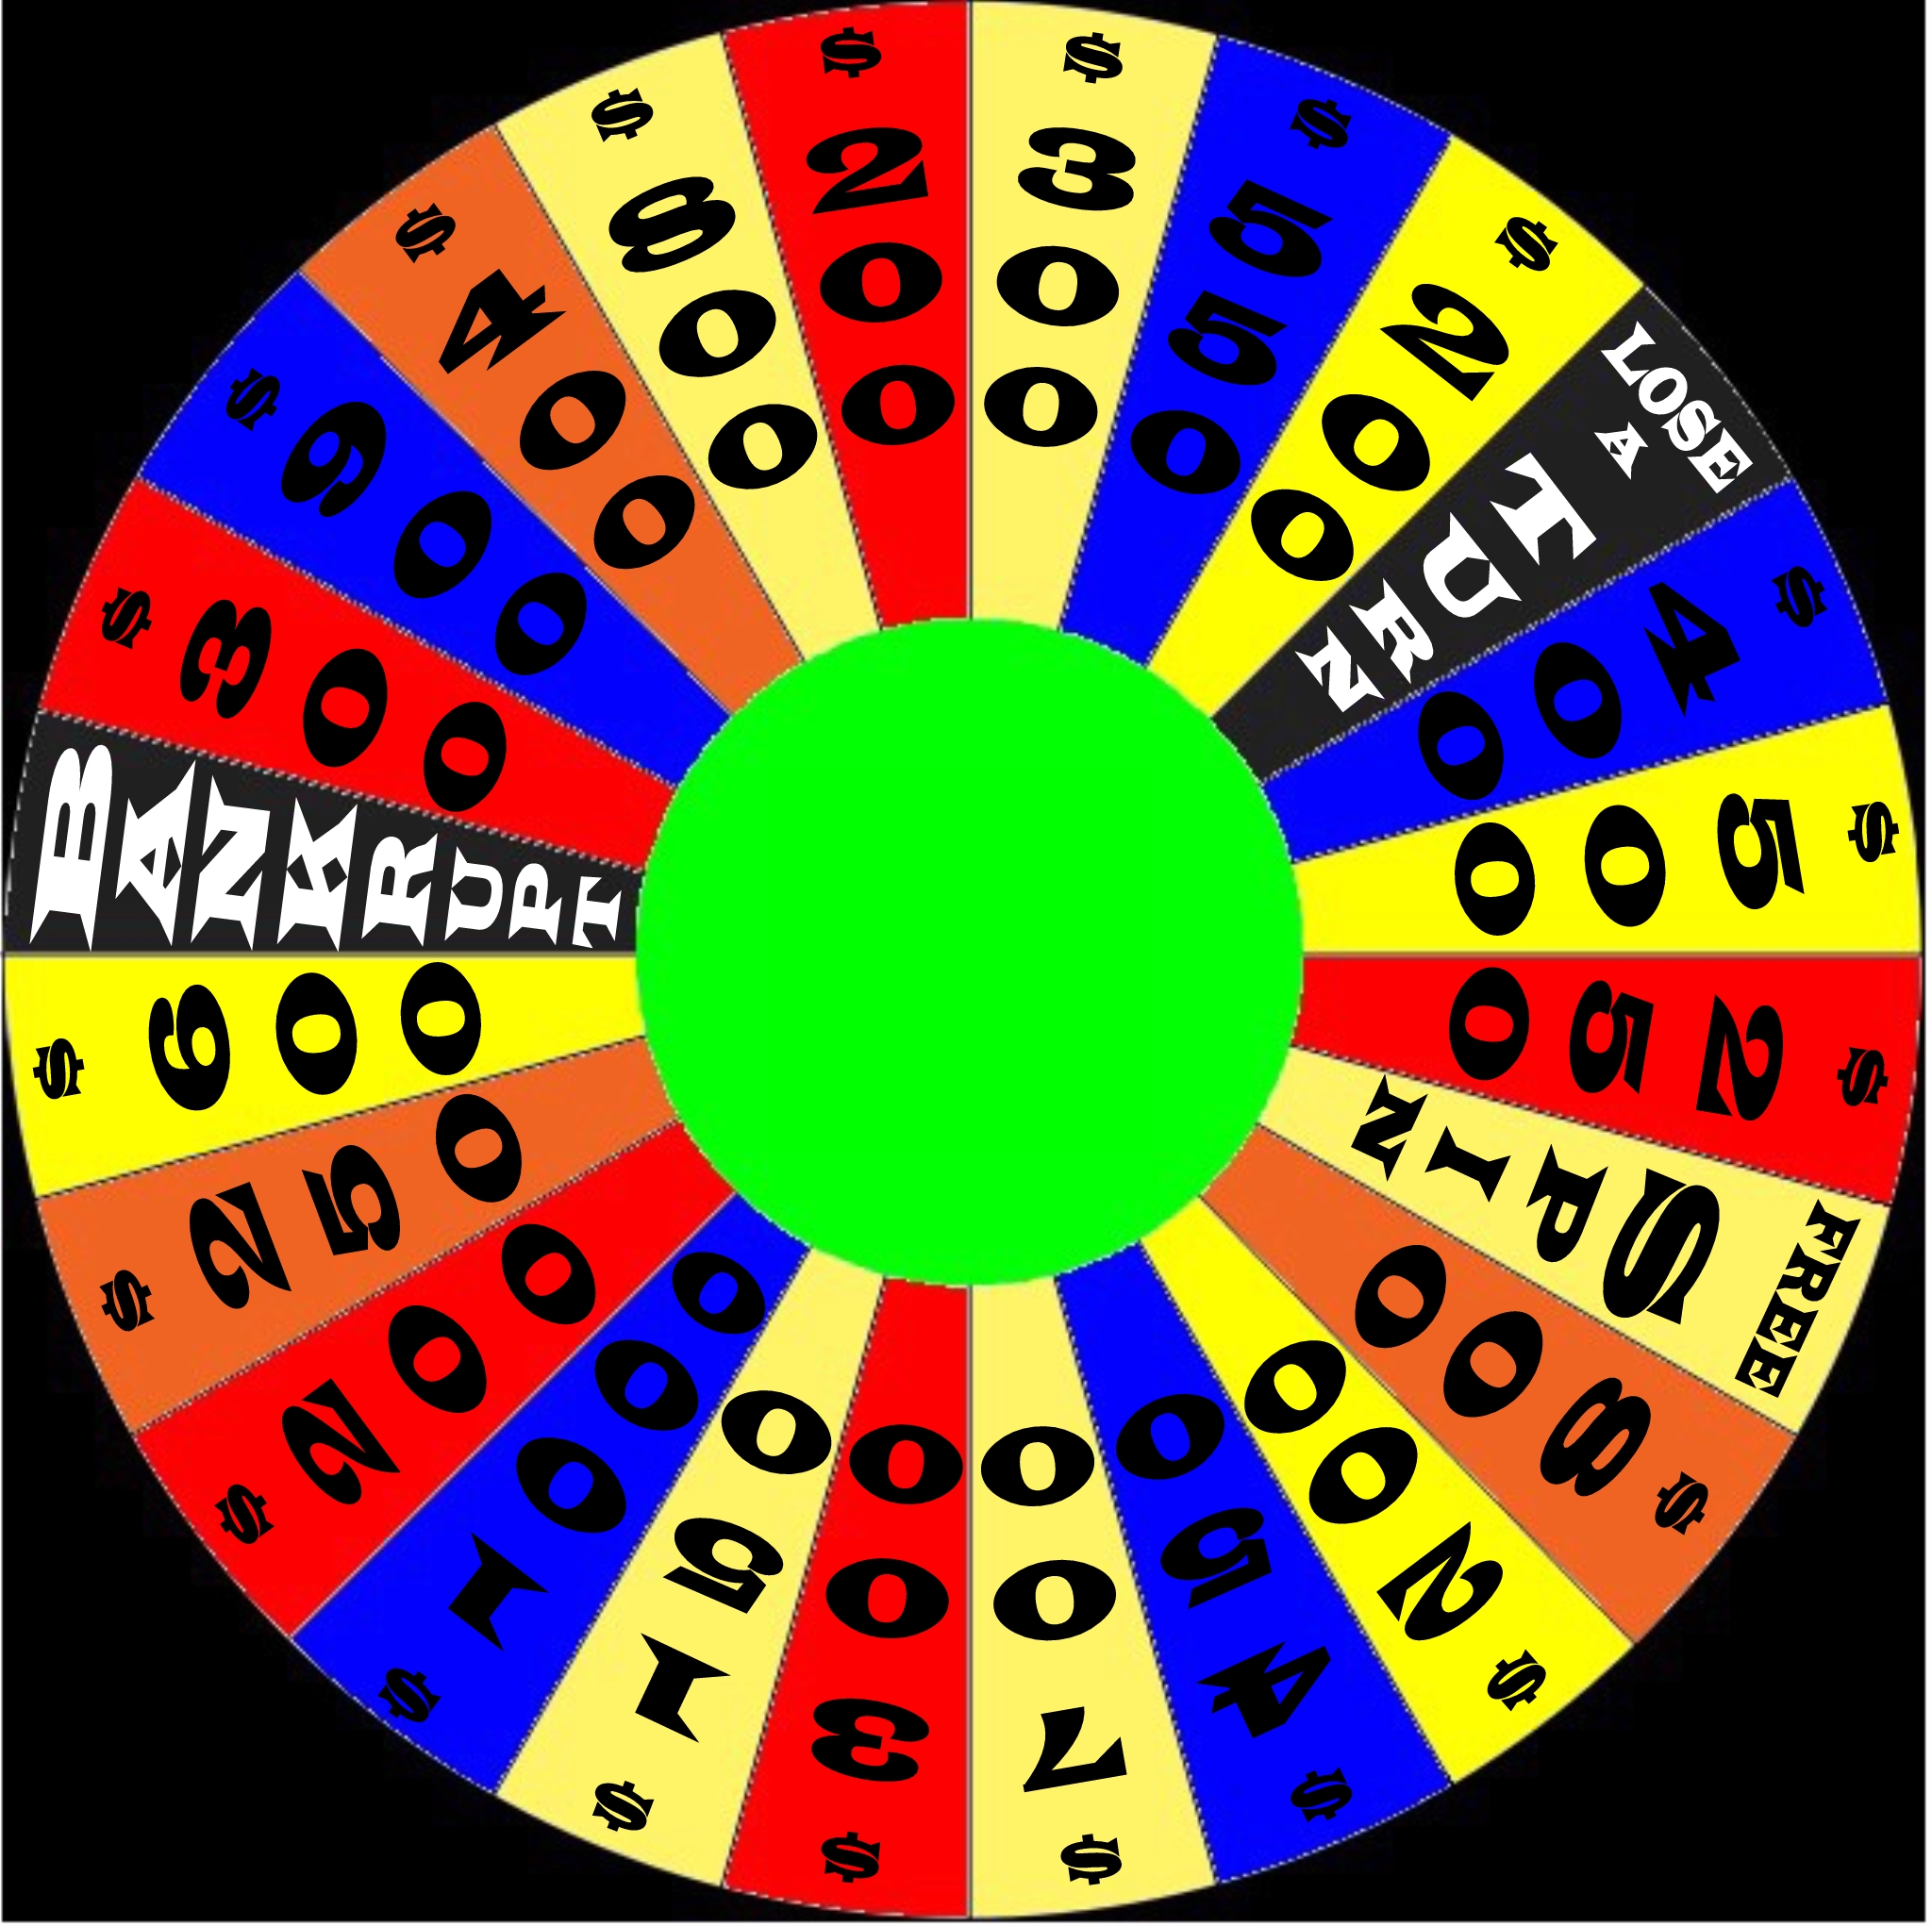 Pressman's Old Wheel of Fortune by germanname